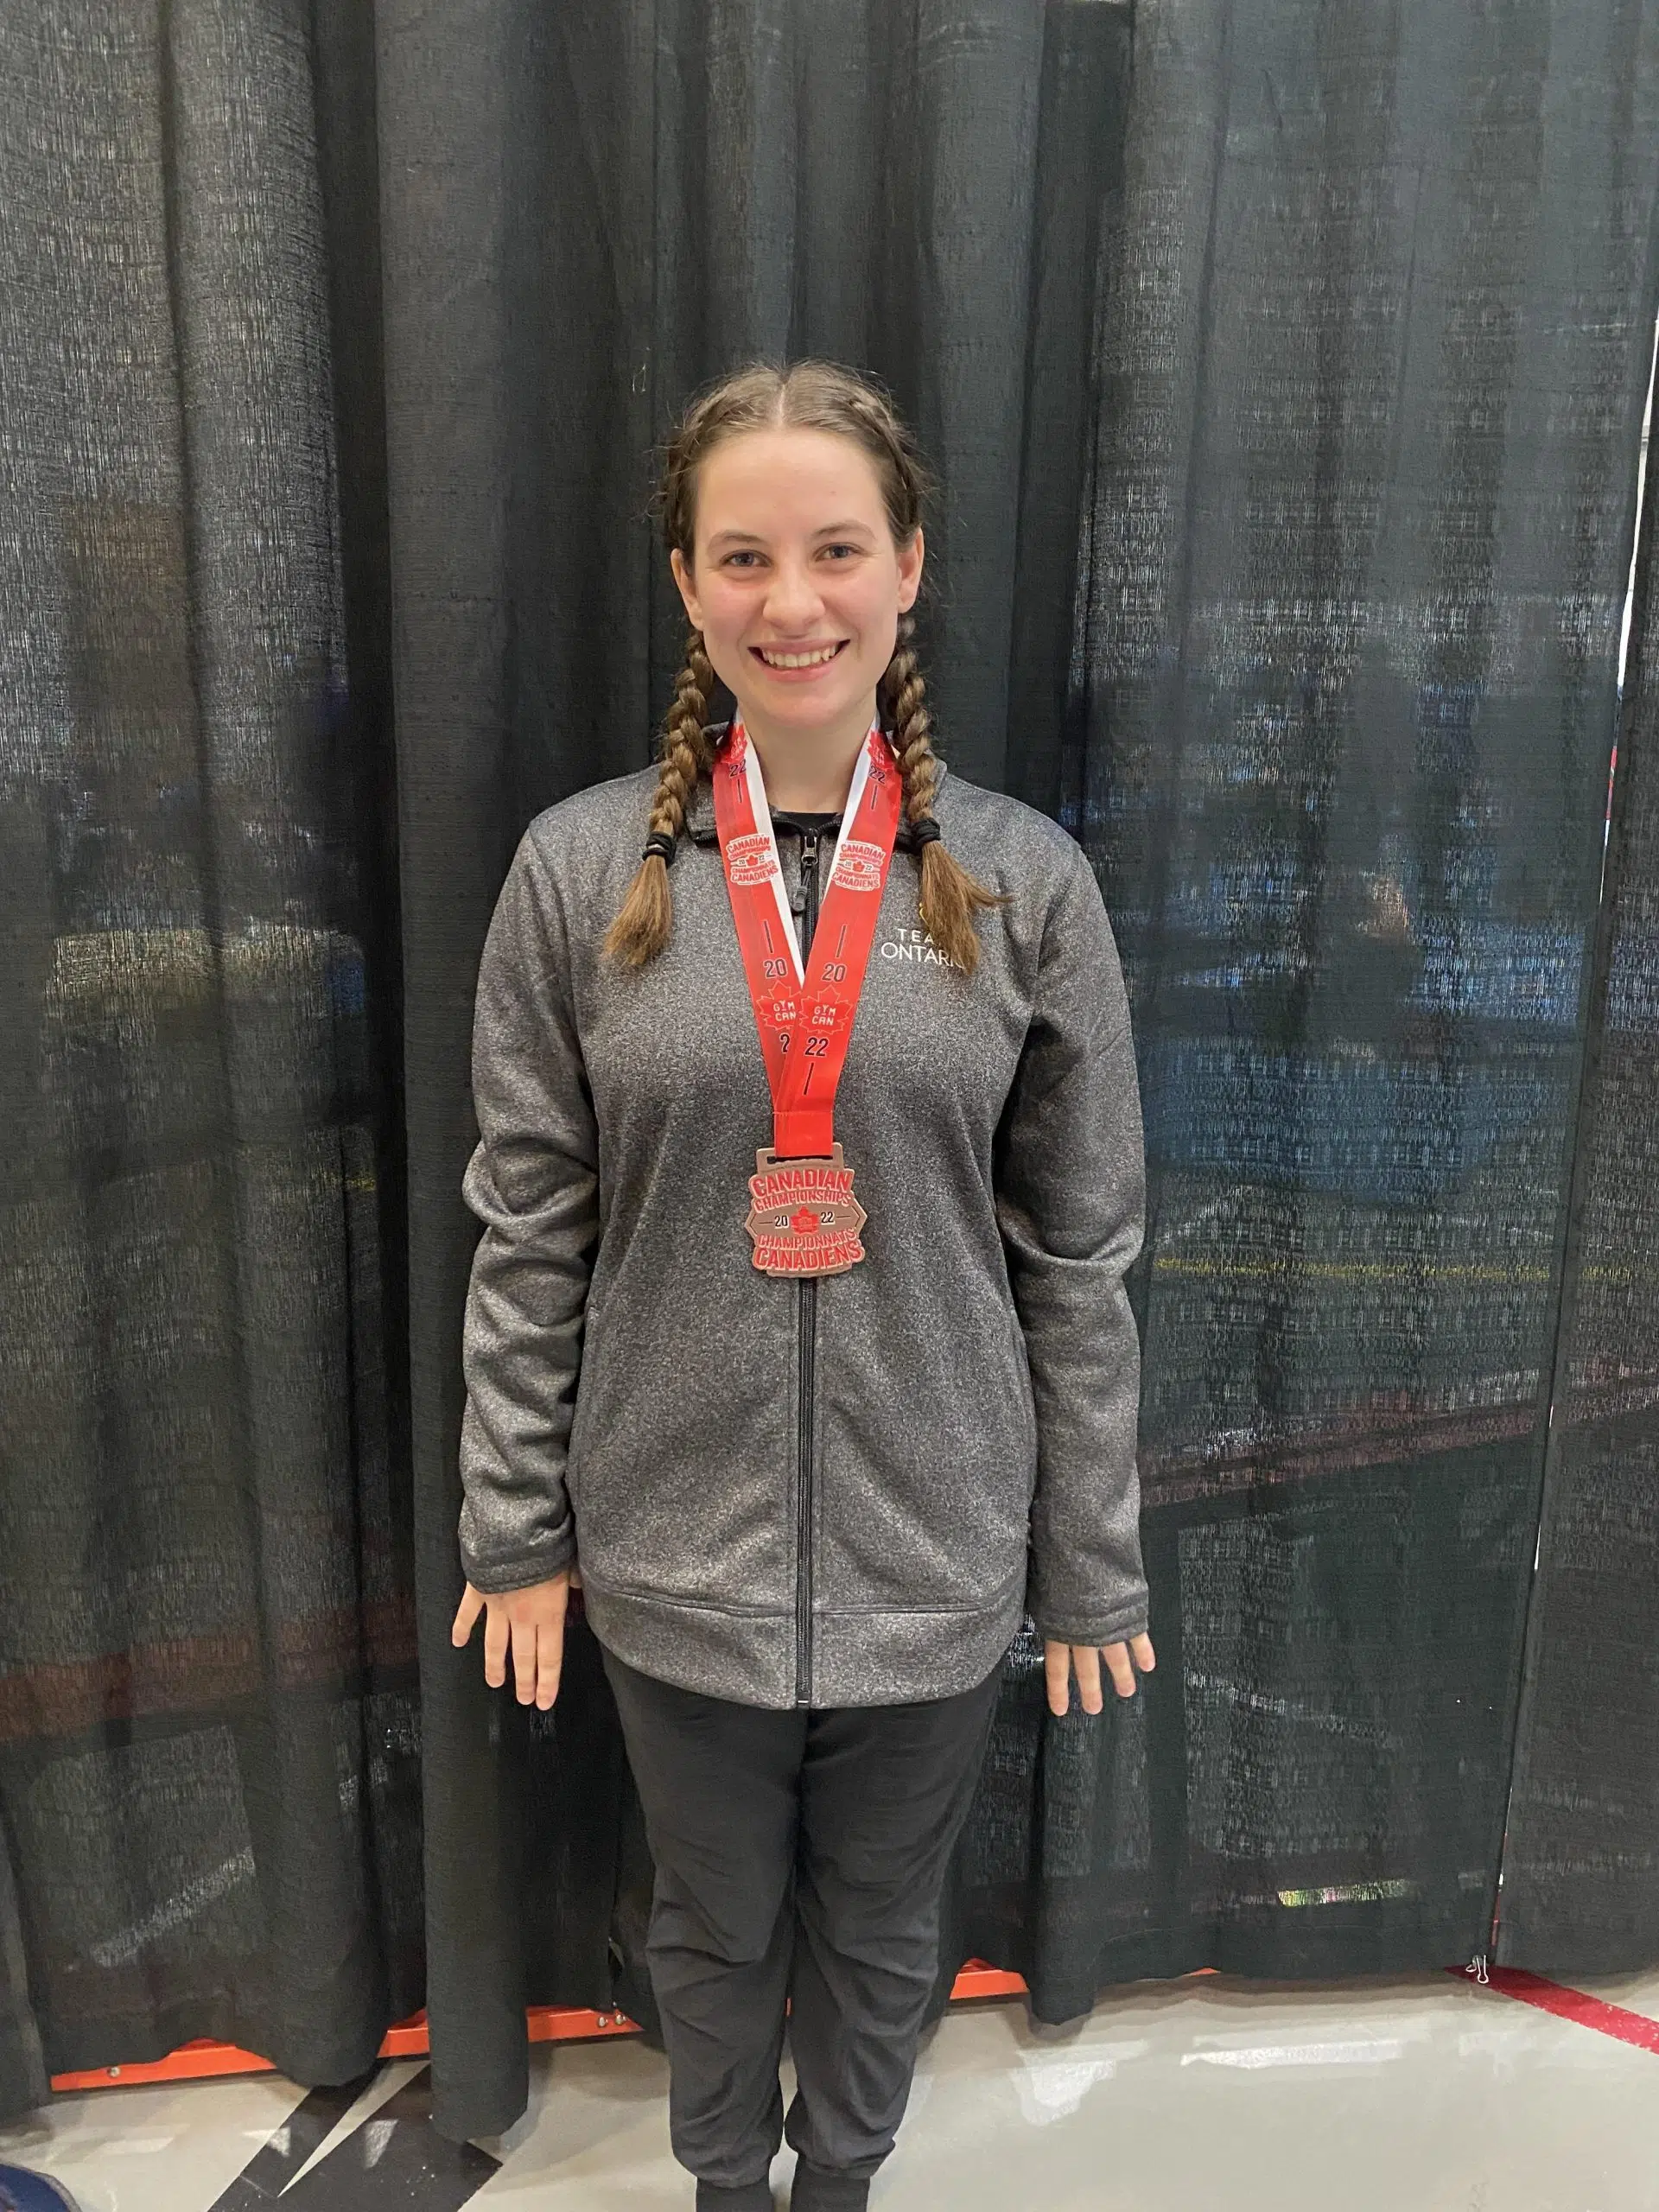 Bay of Quinte gymnasts compete nationally